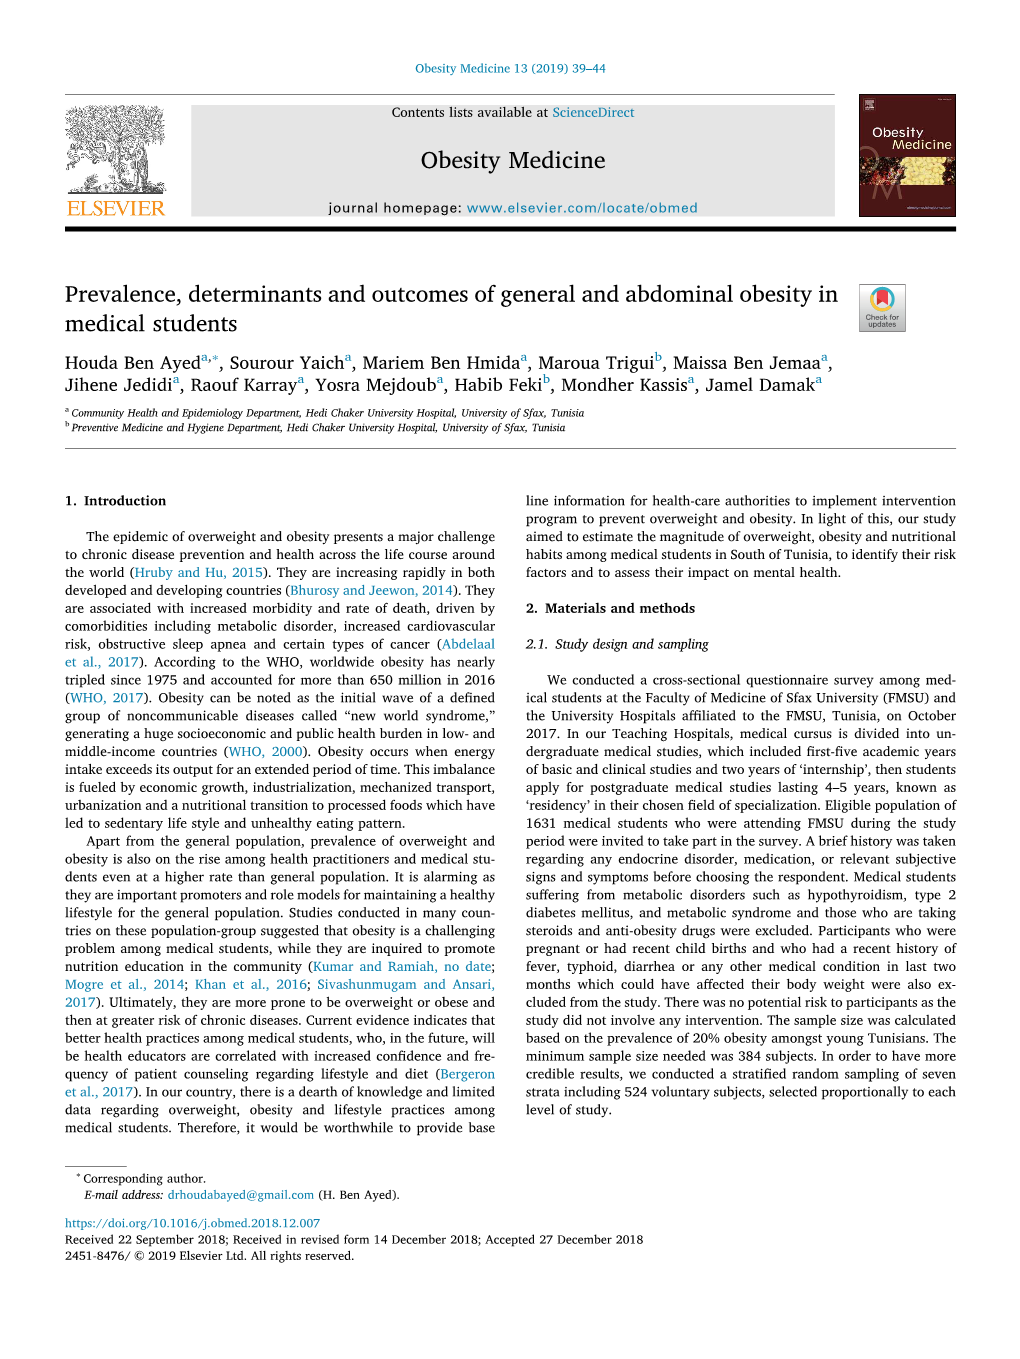 Prevalence, Determinants and Outcomes of General And